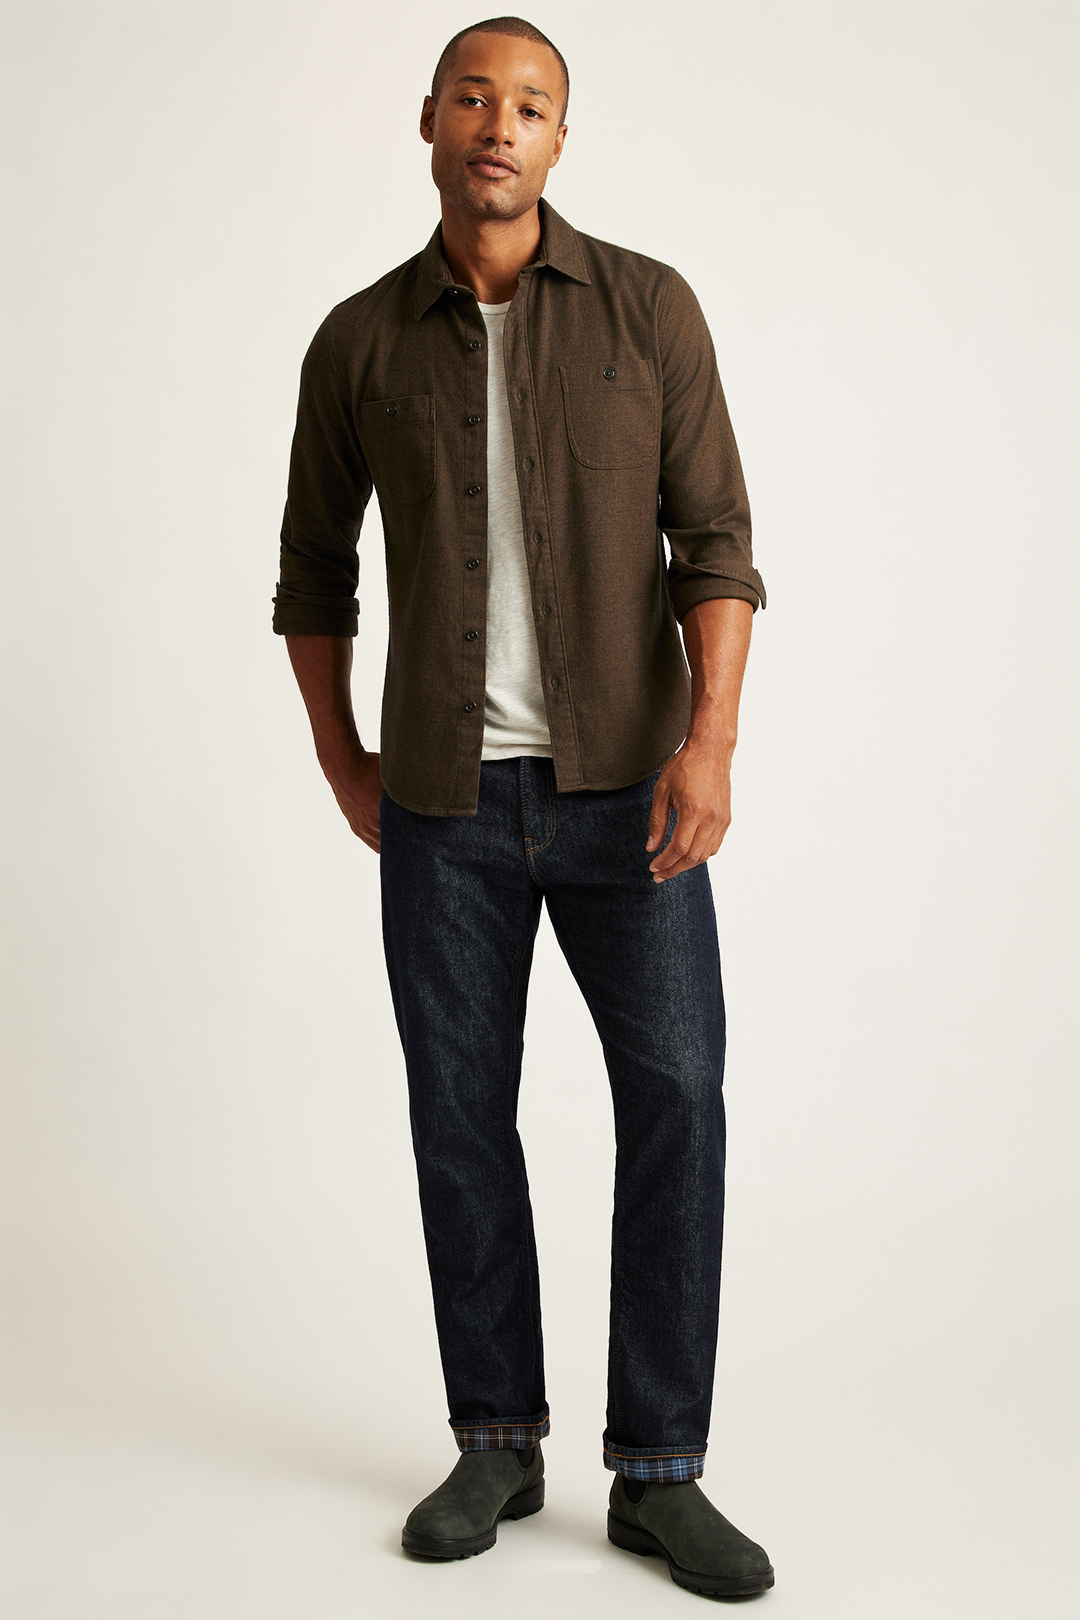 Wear brown shirt jacket, white t-shirt, navy denim jeans, and olive Chelsea boots